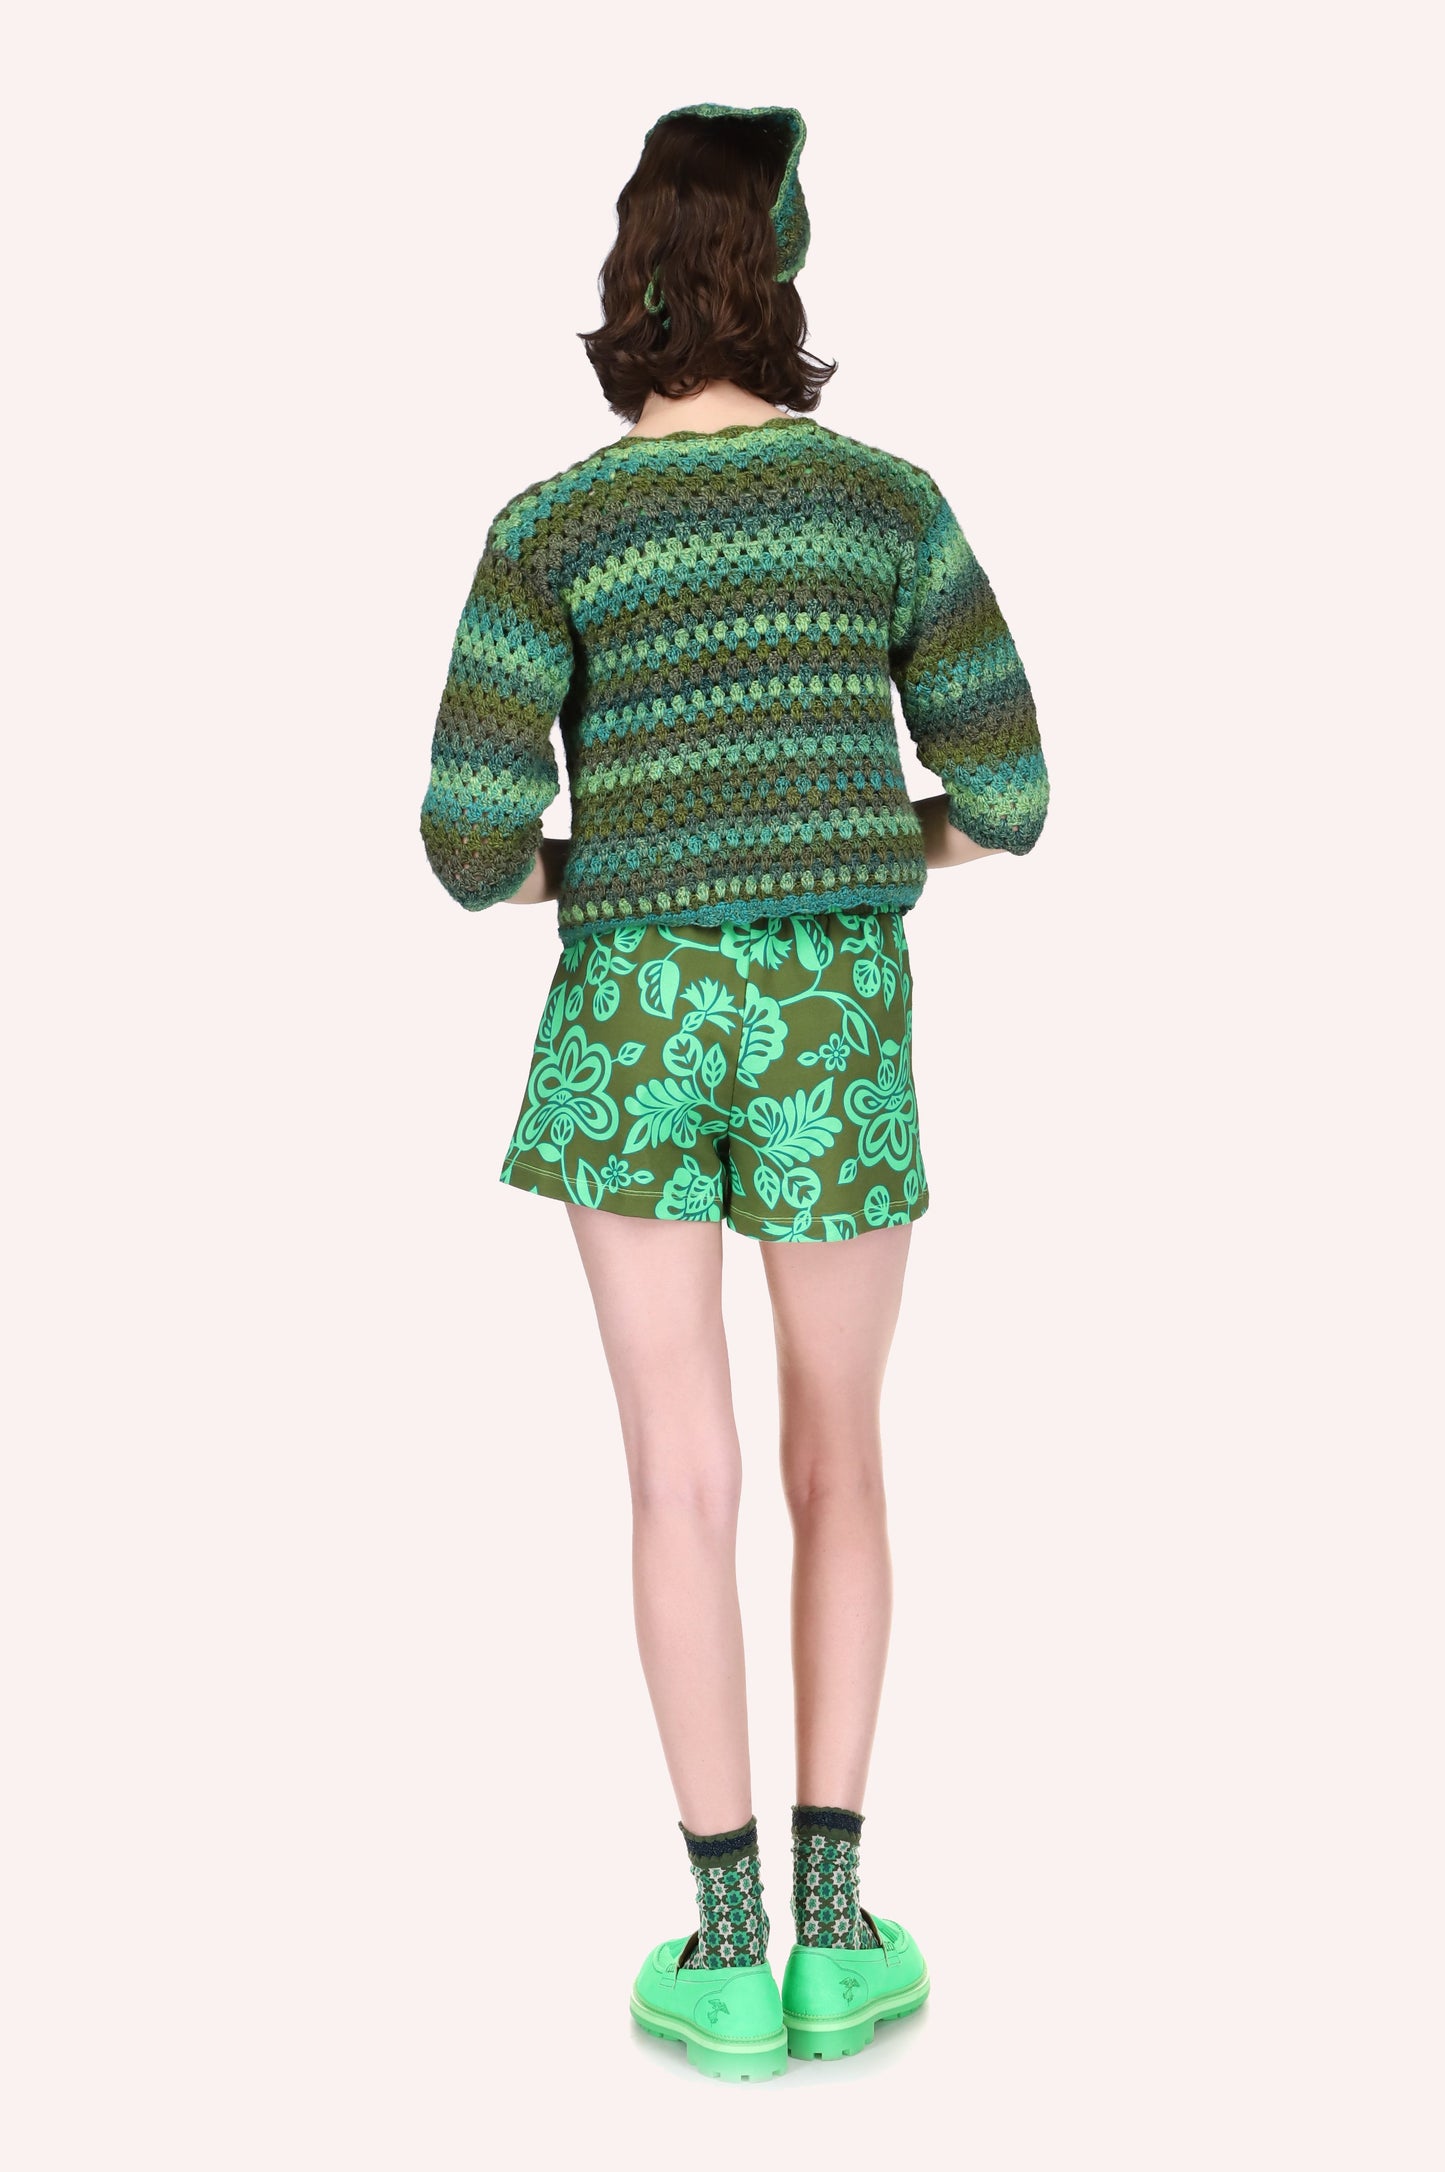 Ombre Hand Crochet Cardigan Green back is showing the different shades of green stripe